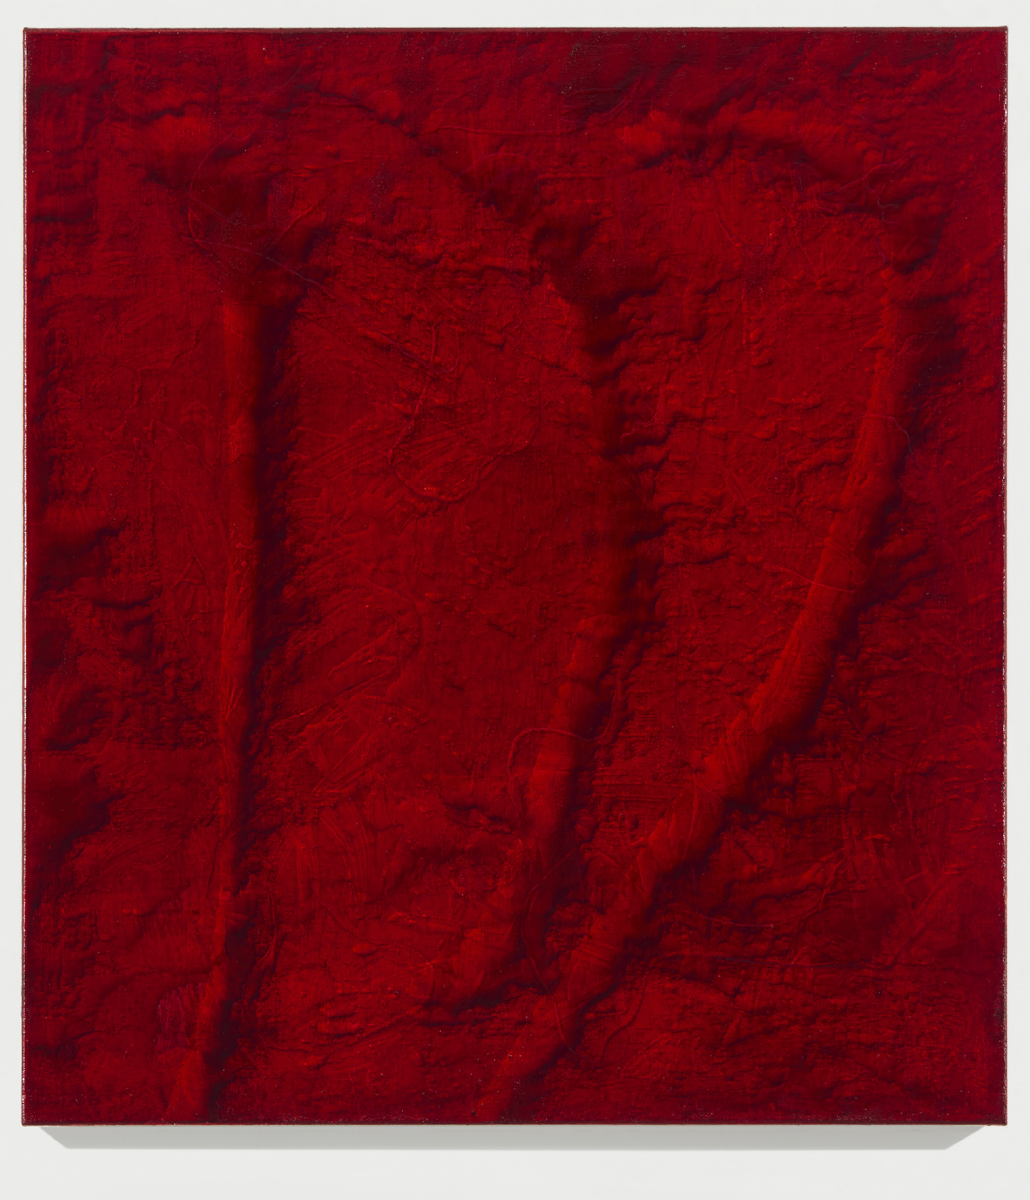 Picture of Untitled Red